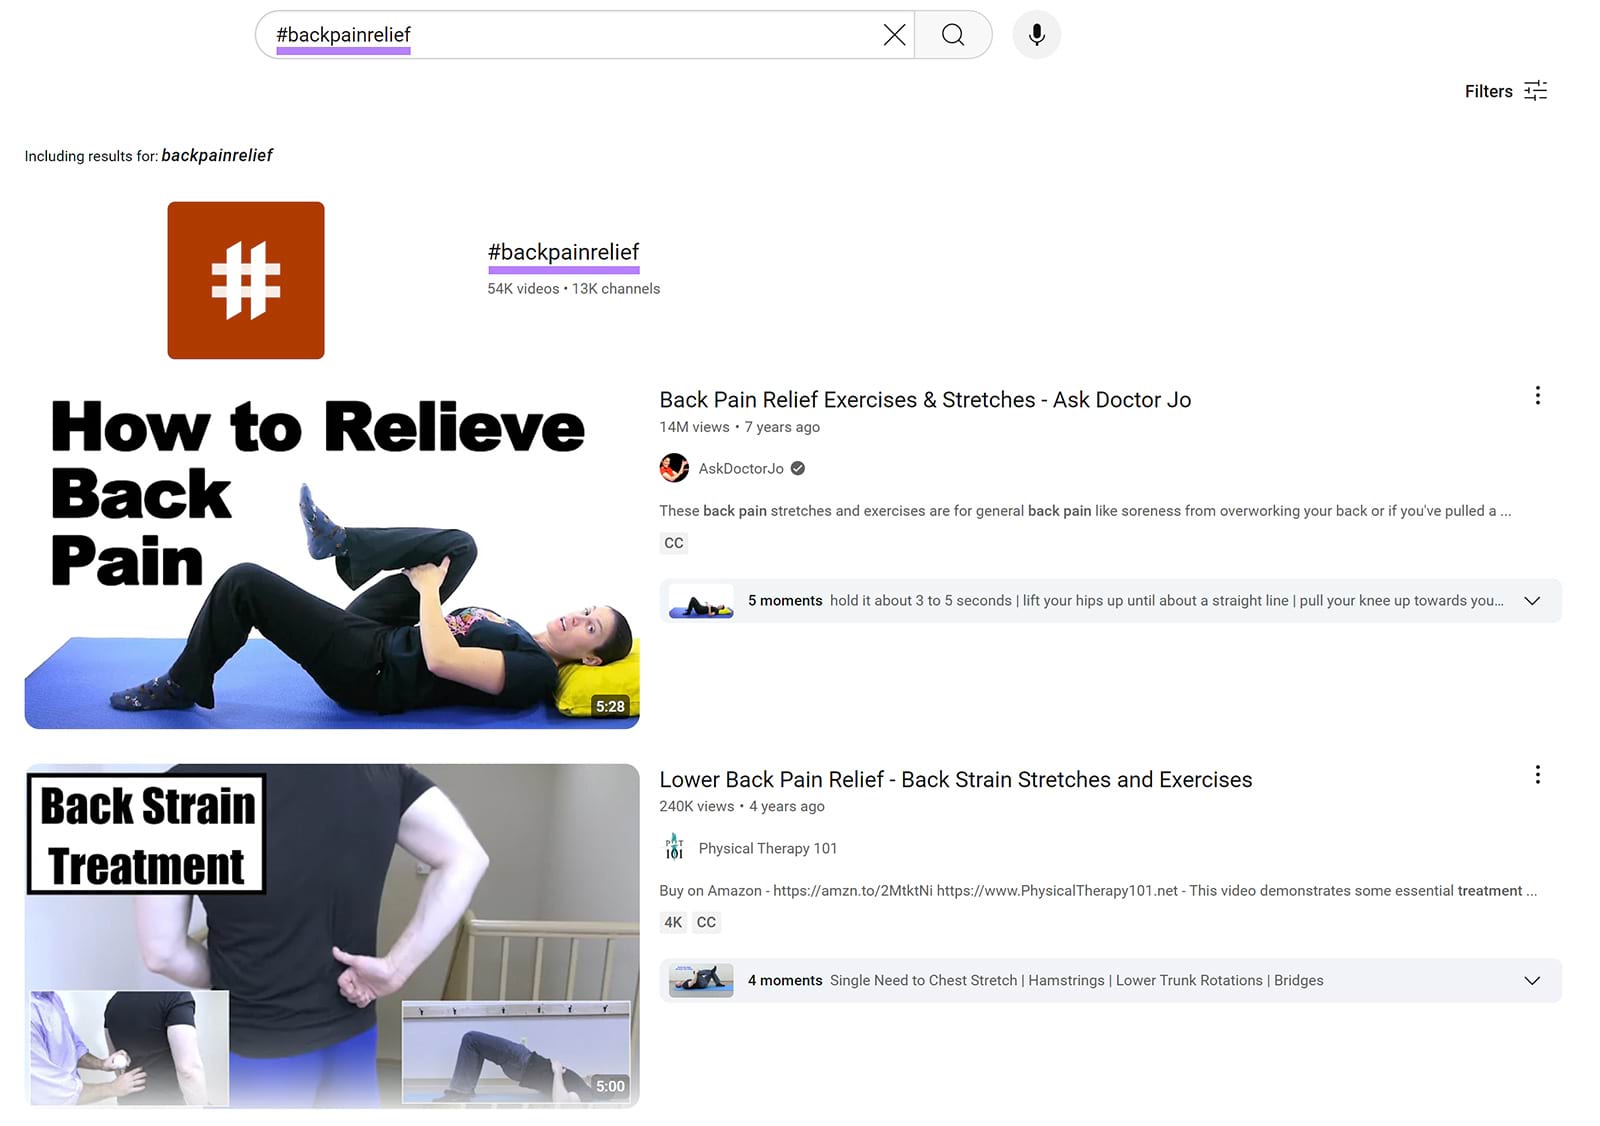 YouTube search results for '#backpainrelief'.